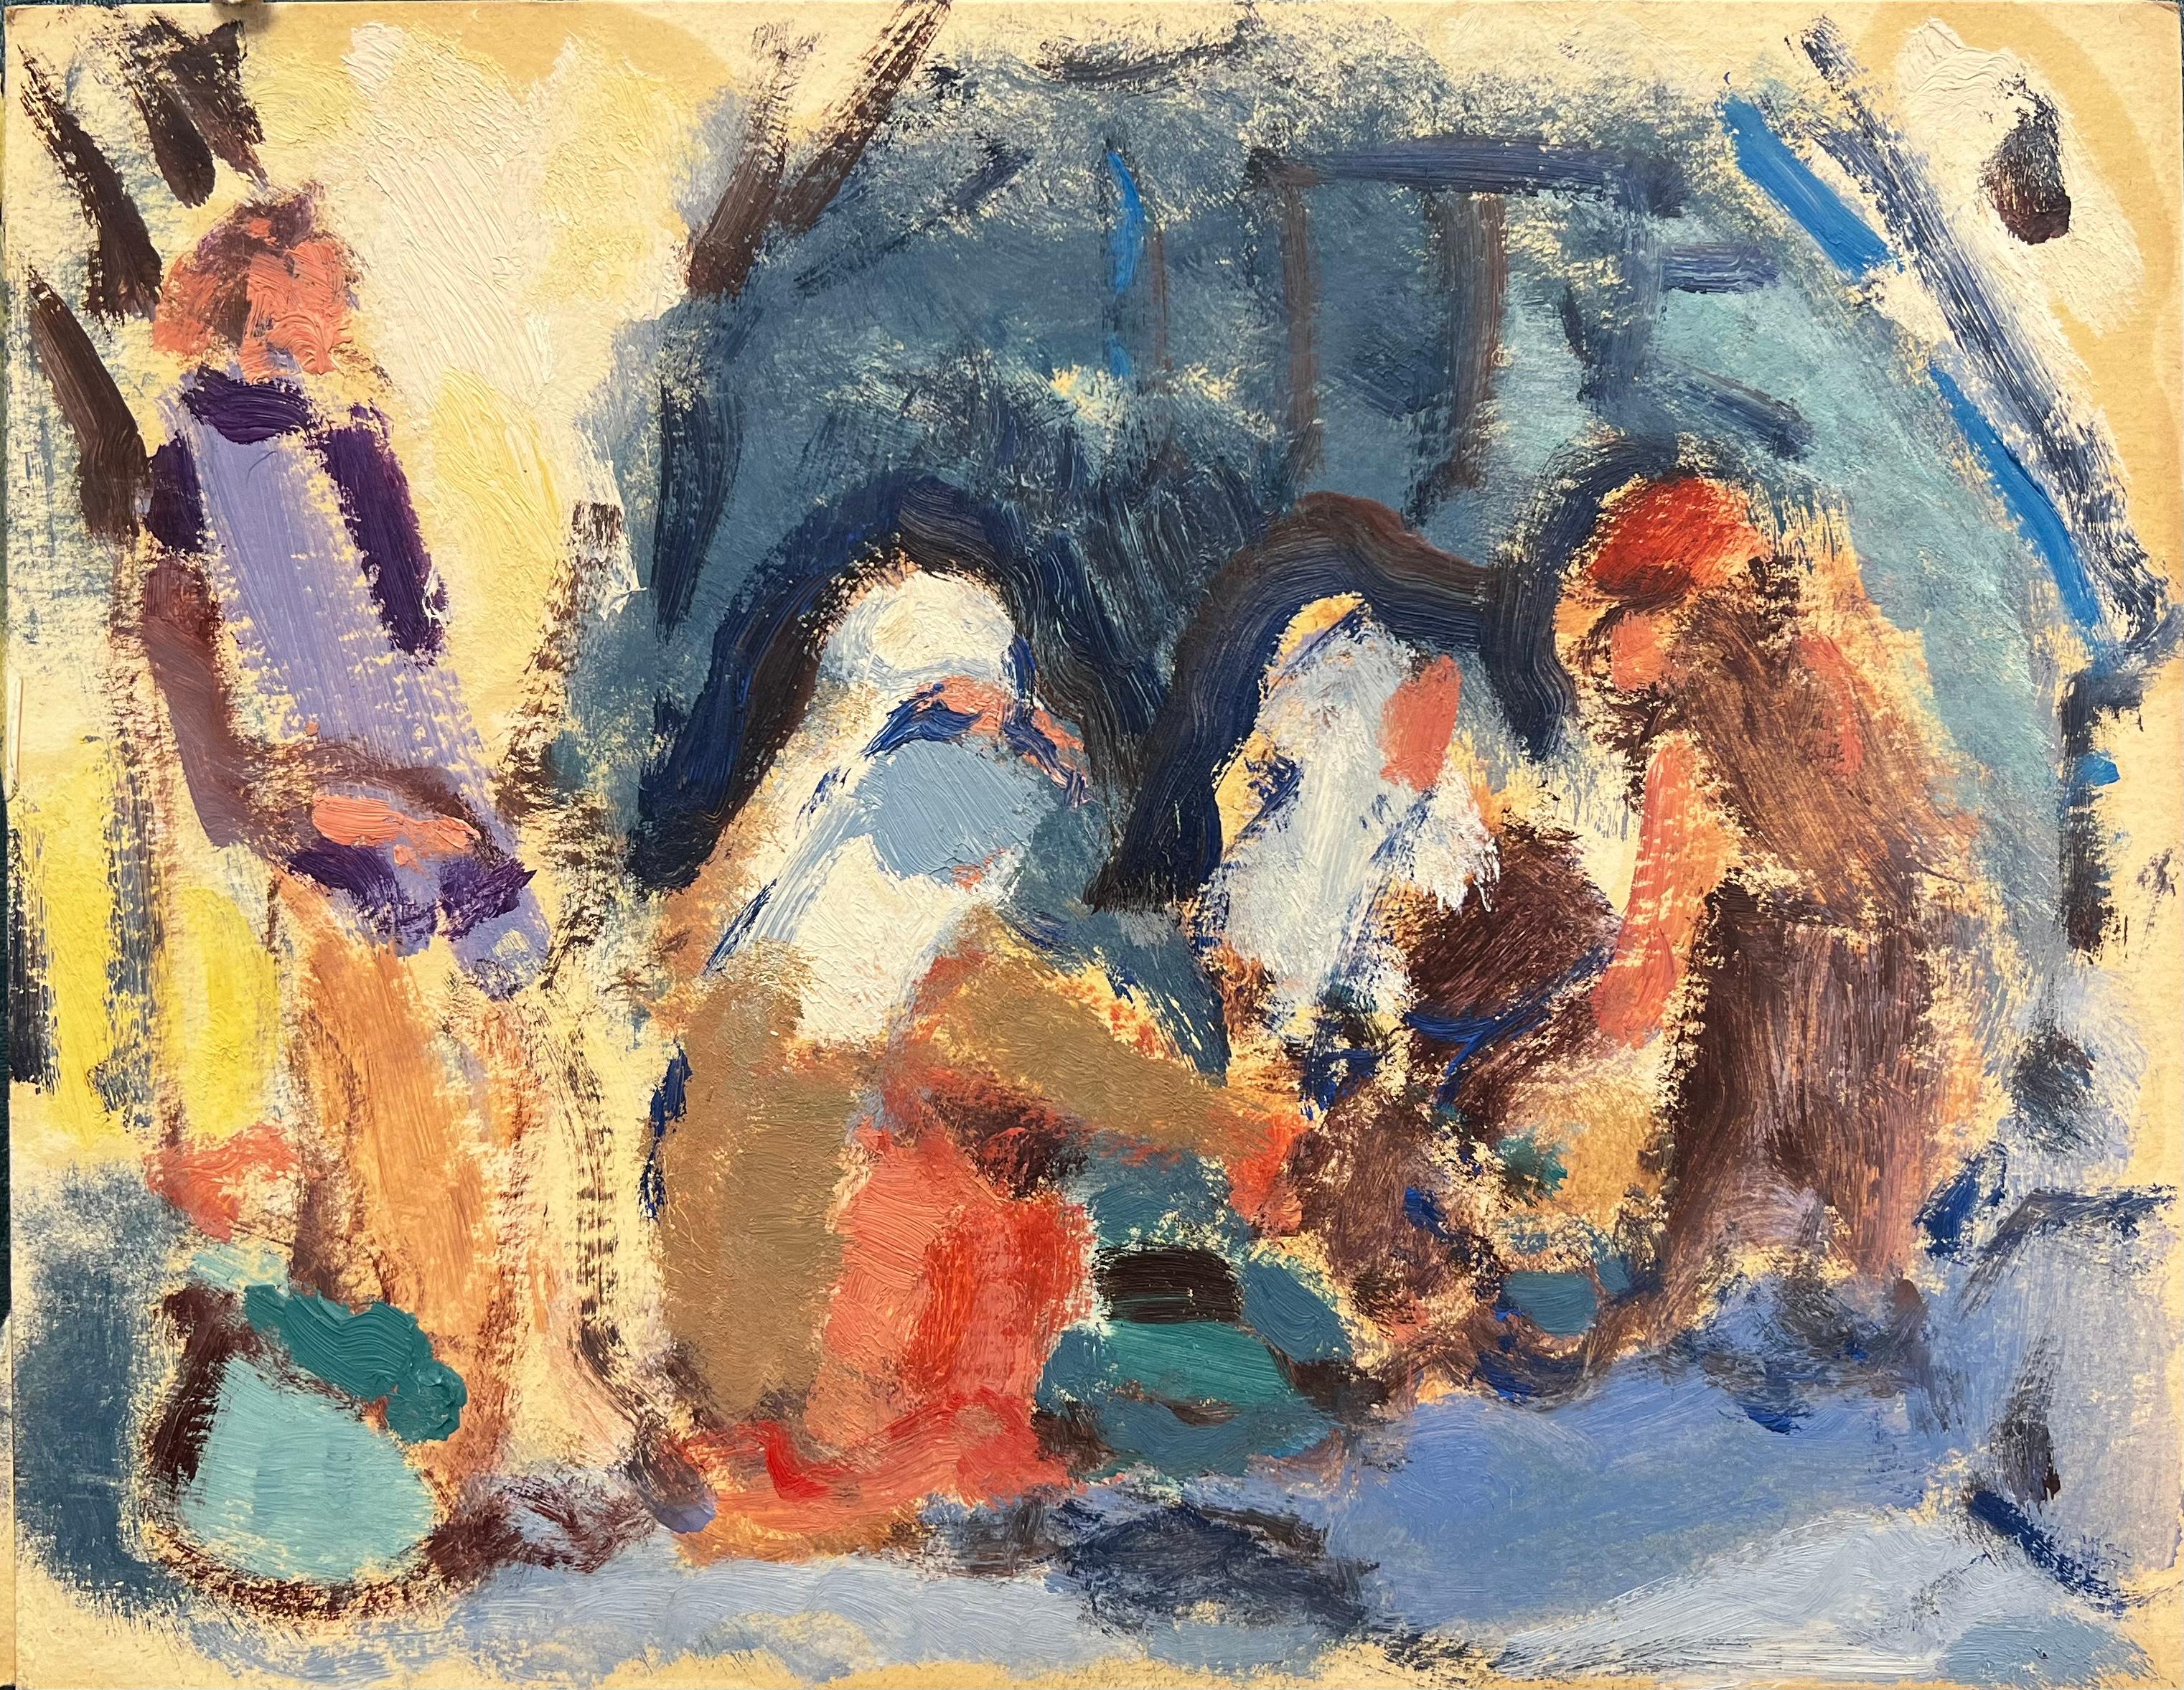 Elisabeth Hahn Figurative Painting - 20th Century German Modernist Oil Painting - Busy Figures